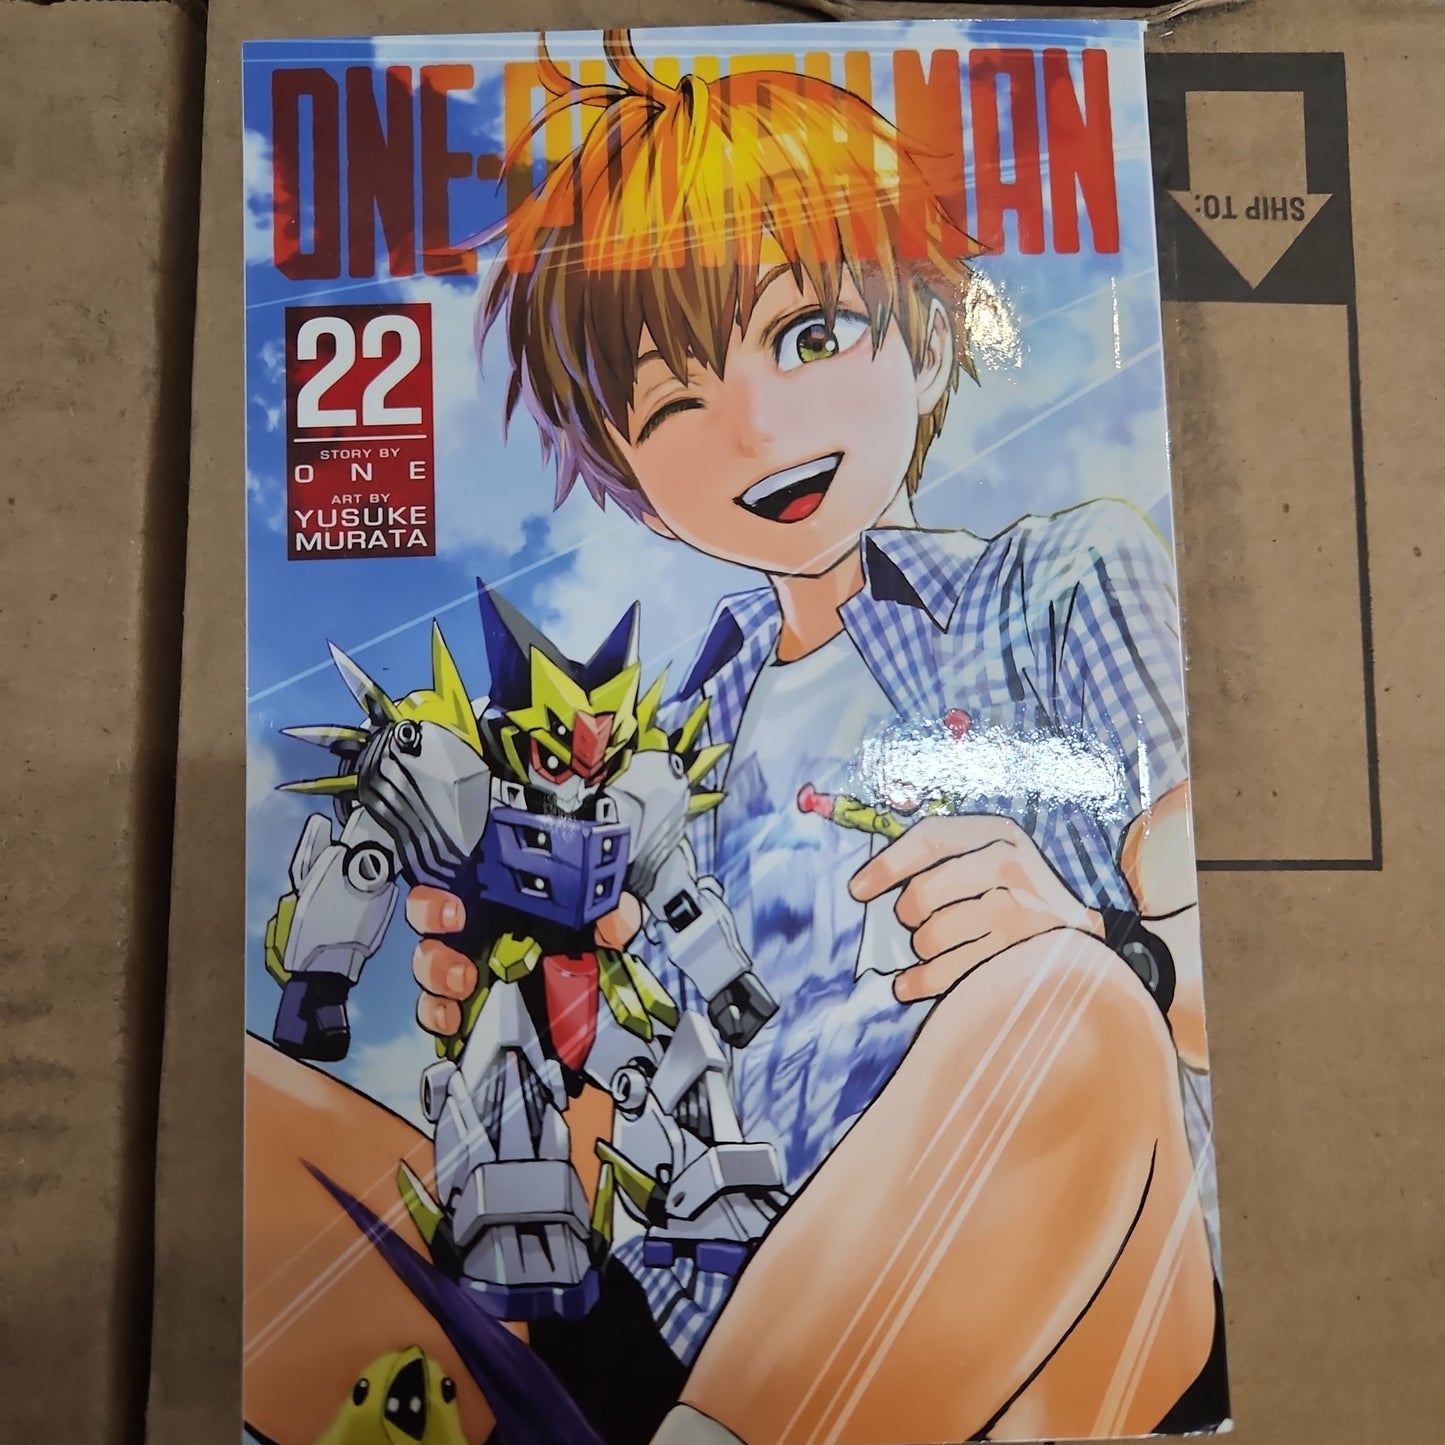 One-Punch Man, Vol. 22 by ONE (Author), Yusuke Murata (Illustrator) Paperback (New)